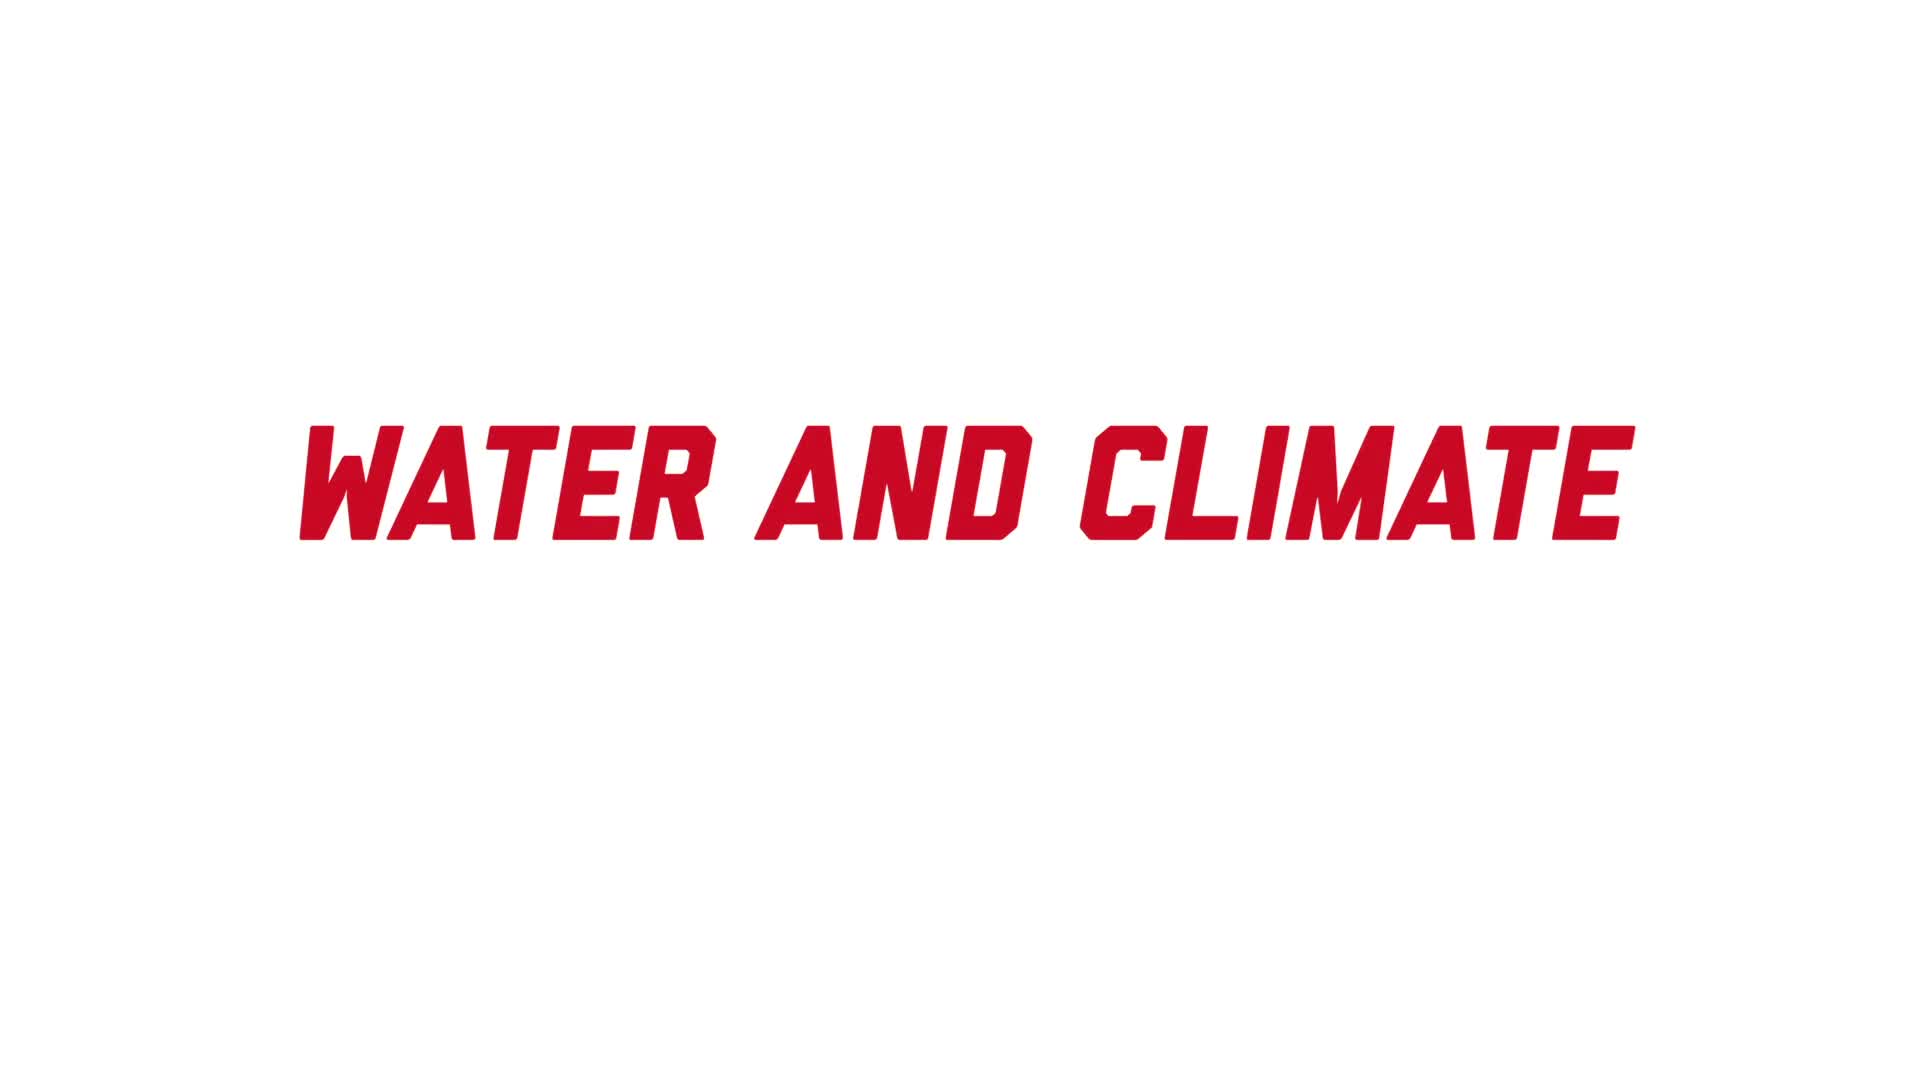 Water and climate innovation at UNL